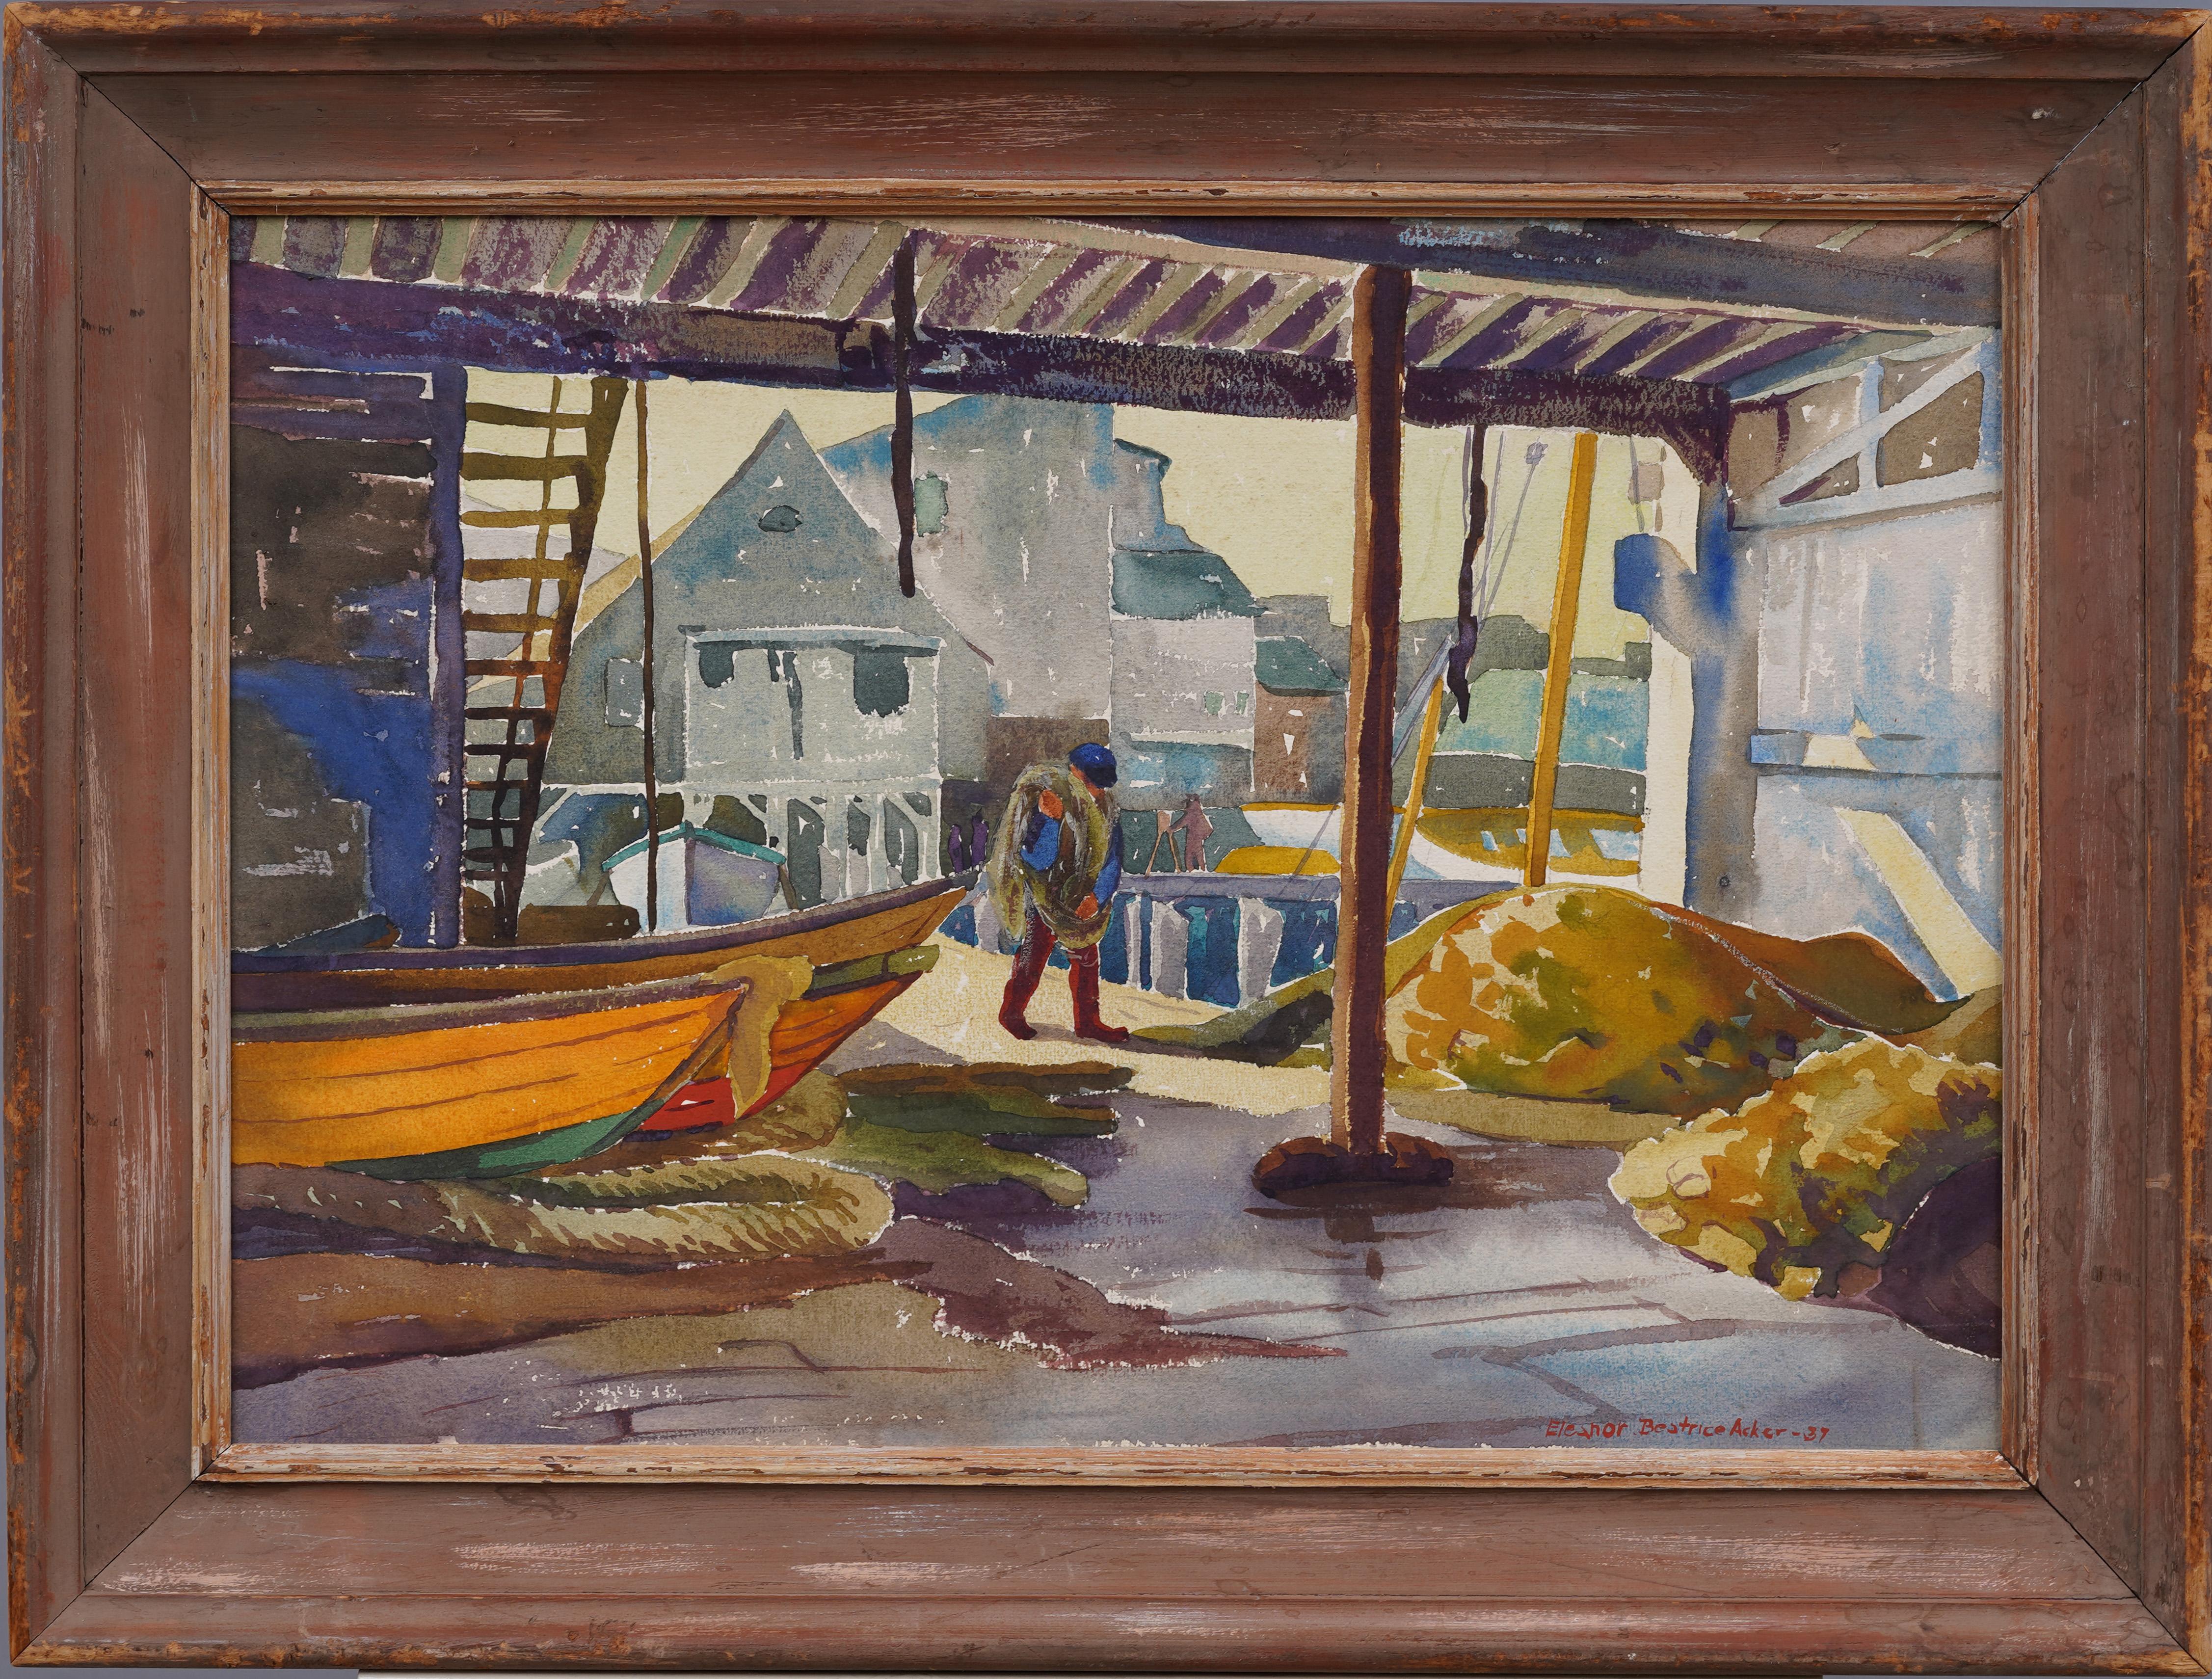 Finely painted American school modernist dock scene by Eleanor Beatrice Acker (Born 1907).  Watercolor and gouache on paper.  Nicely framed.  Signed and dated.  Artist biography; Eleanor Beatrice Acker was a block printer, designer, drawing